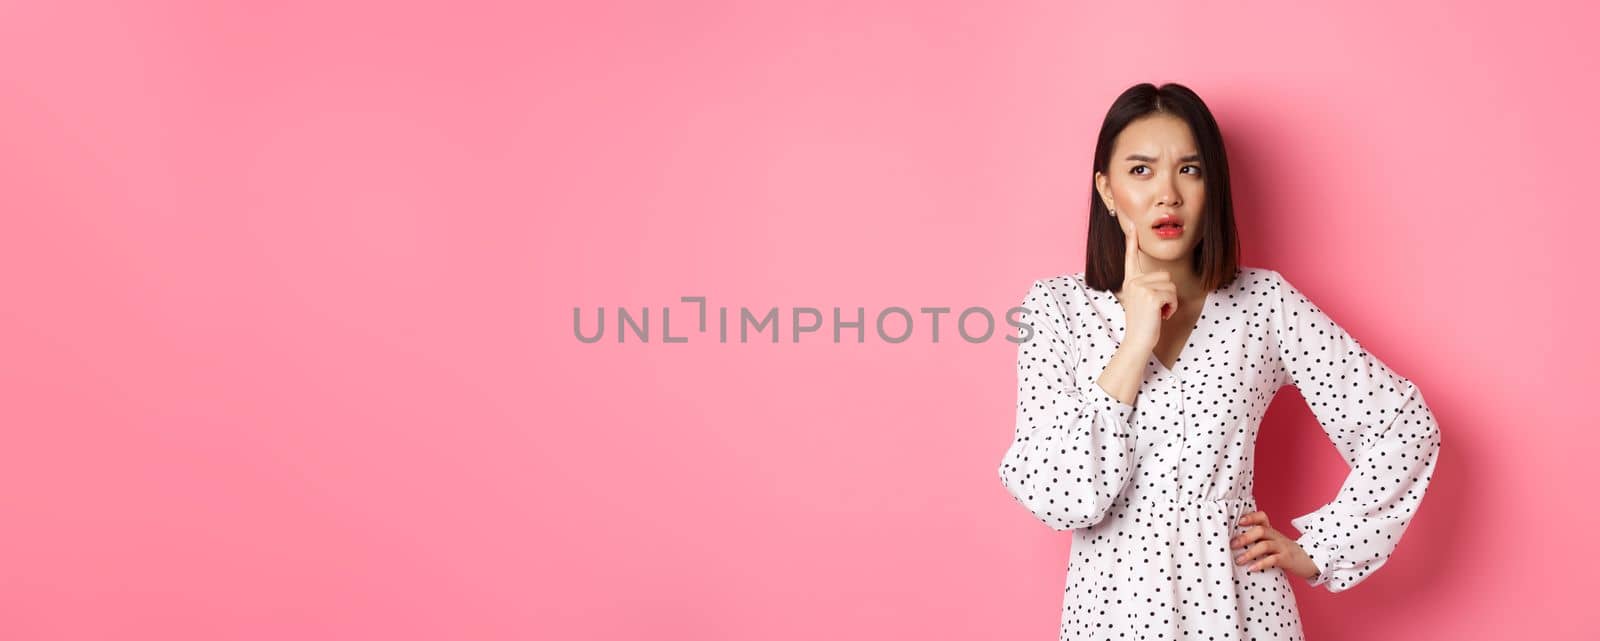 Thoughtful asian woman making assumption, looking up and thinking, deciding something, standing in dress over pink background.